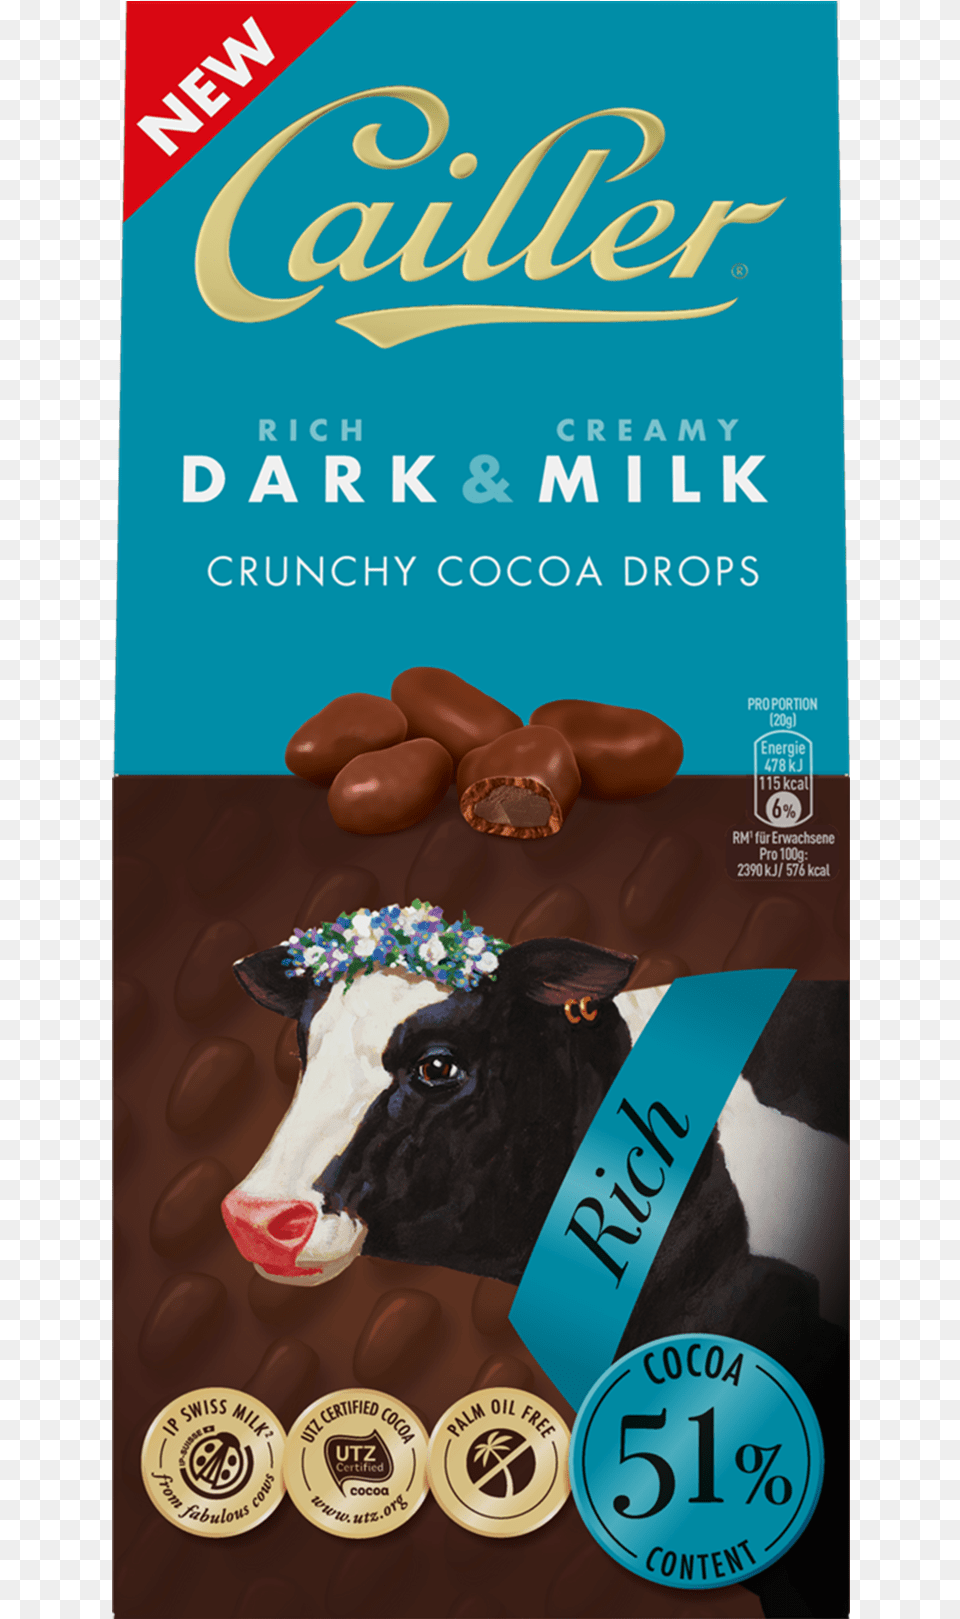 Darkampmilk Crunchy Cocoa Drops 51 Rich Cacao 80g Cailler Crunchy Cocoa Drops, Advertisement, Animal, Cattle, Livestock Png